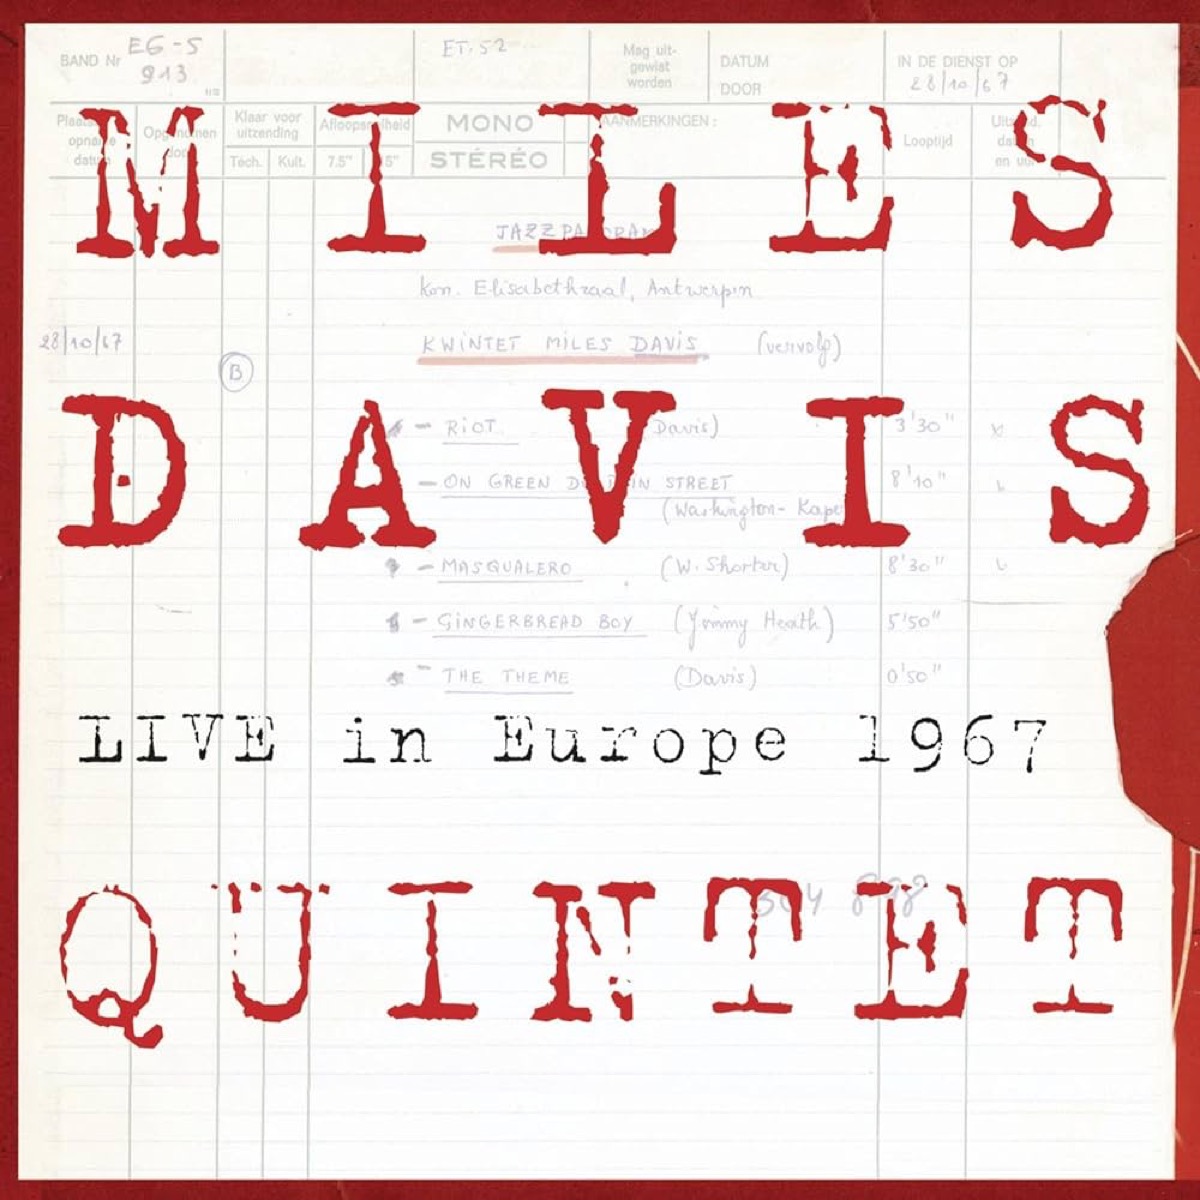 "Live in Europe 1967" by Miles Davis album cover